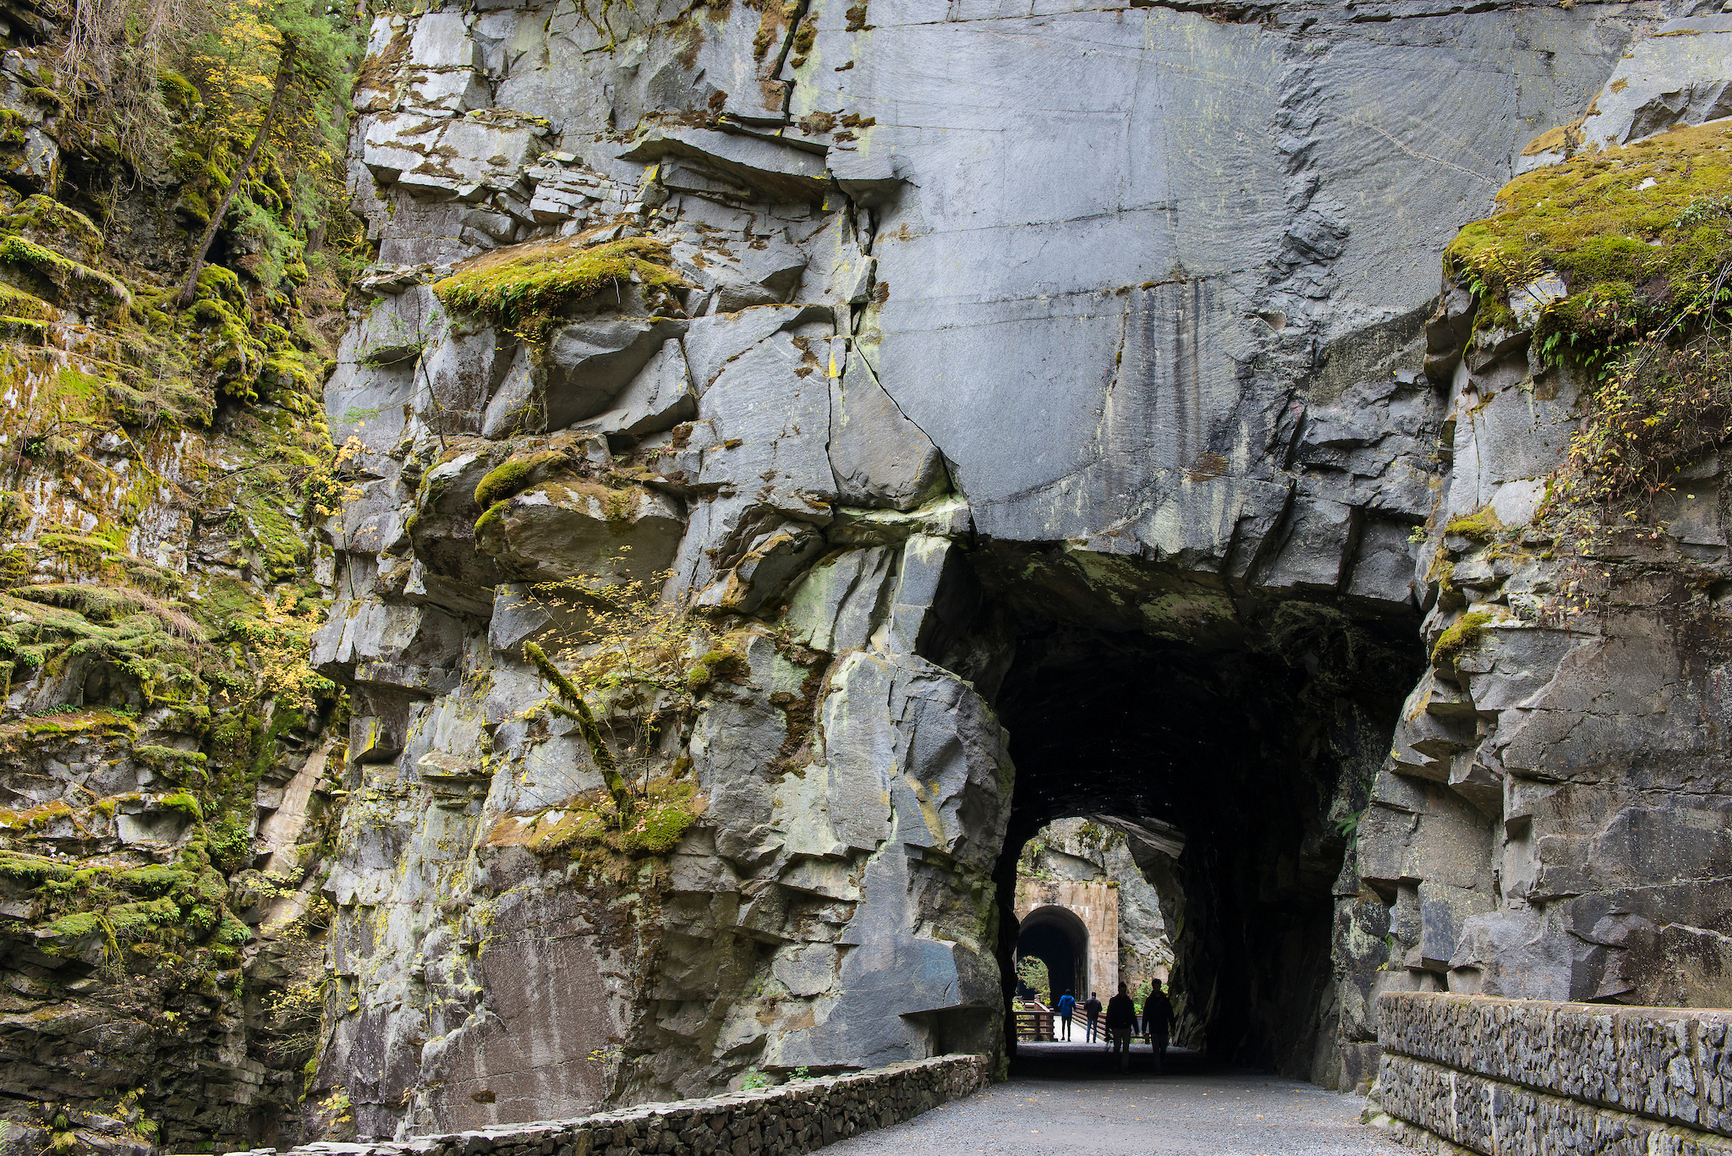 Rock walls and old rail way system that created Othello Tunnels.